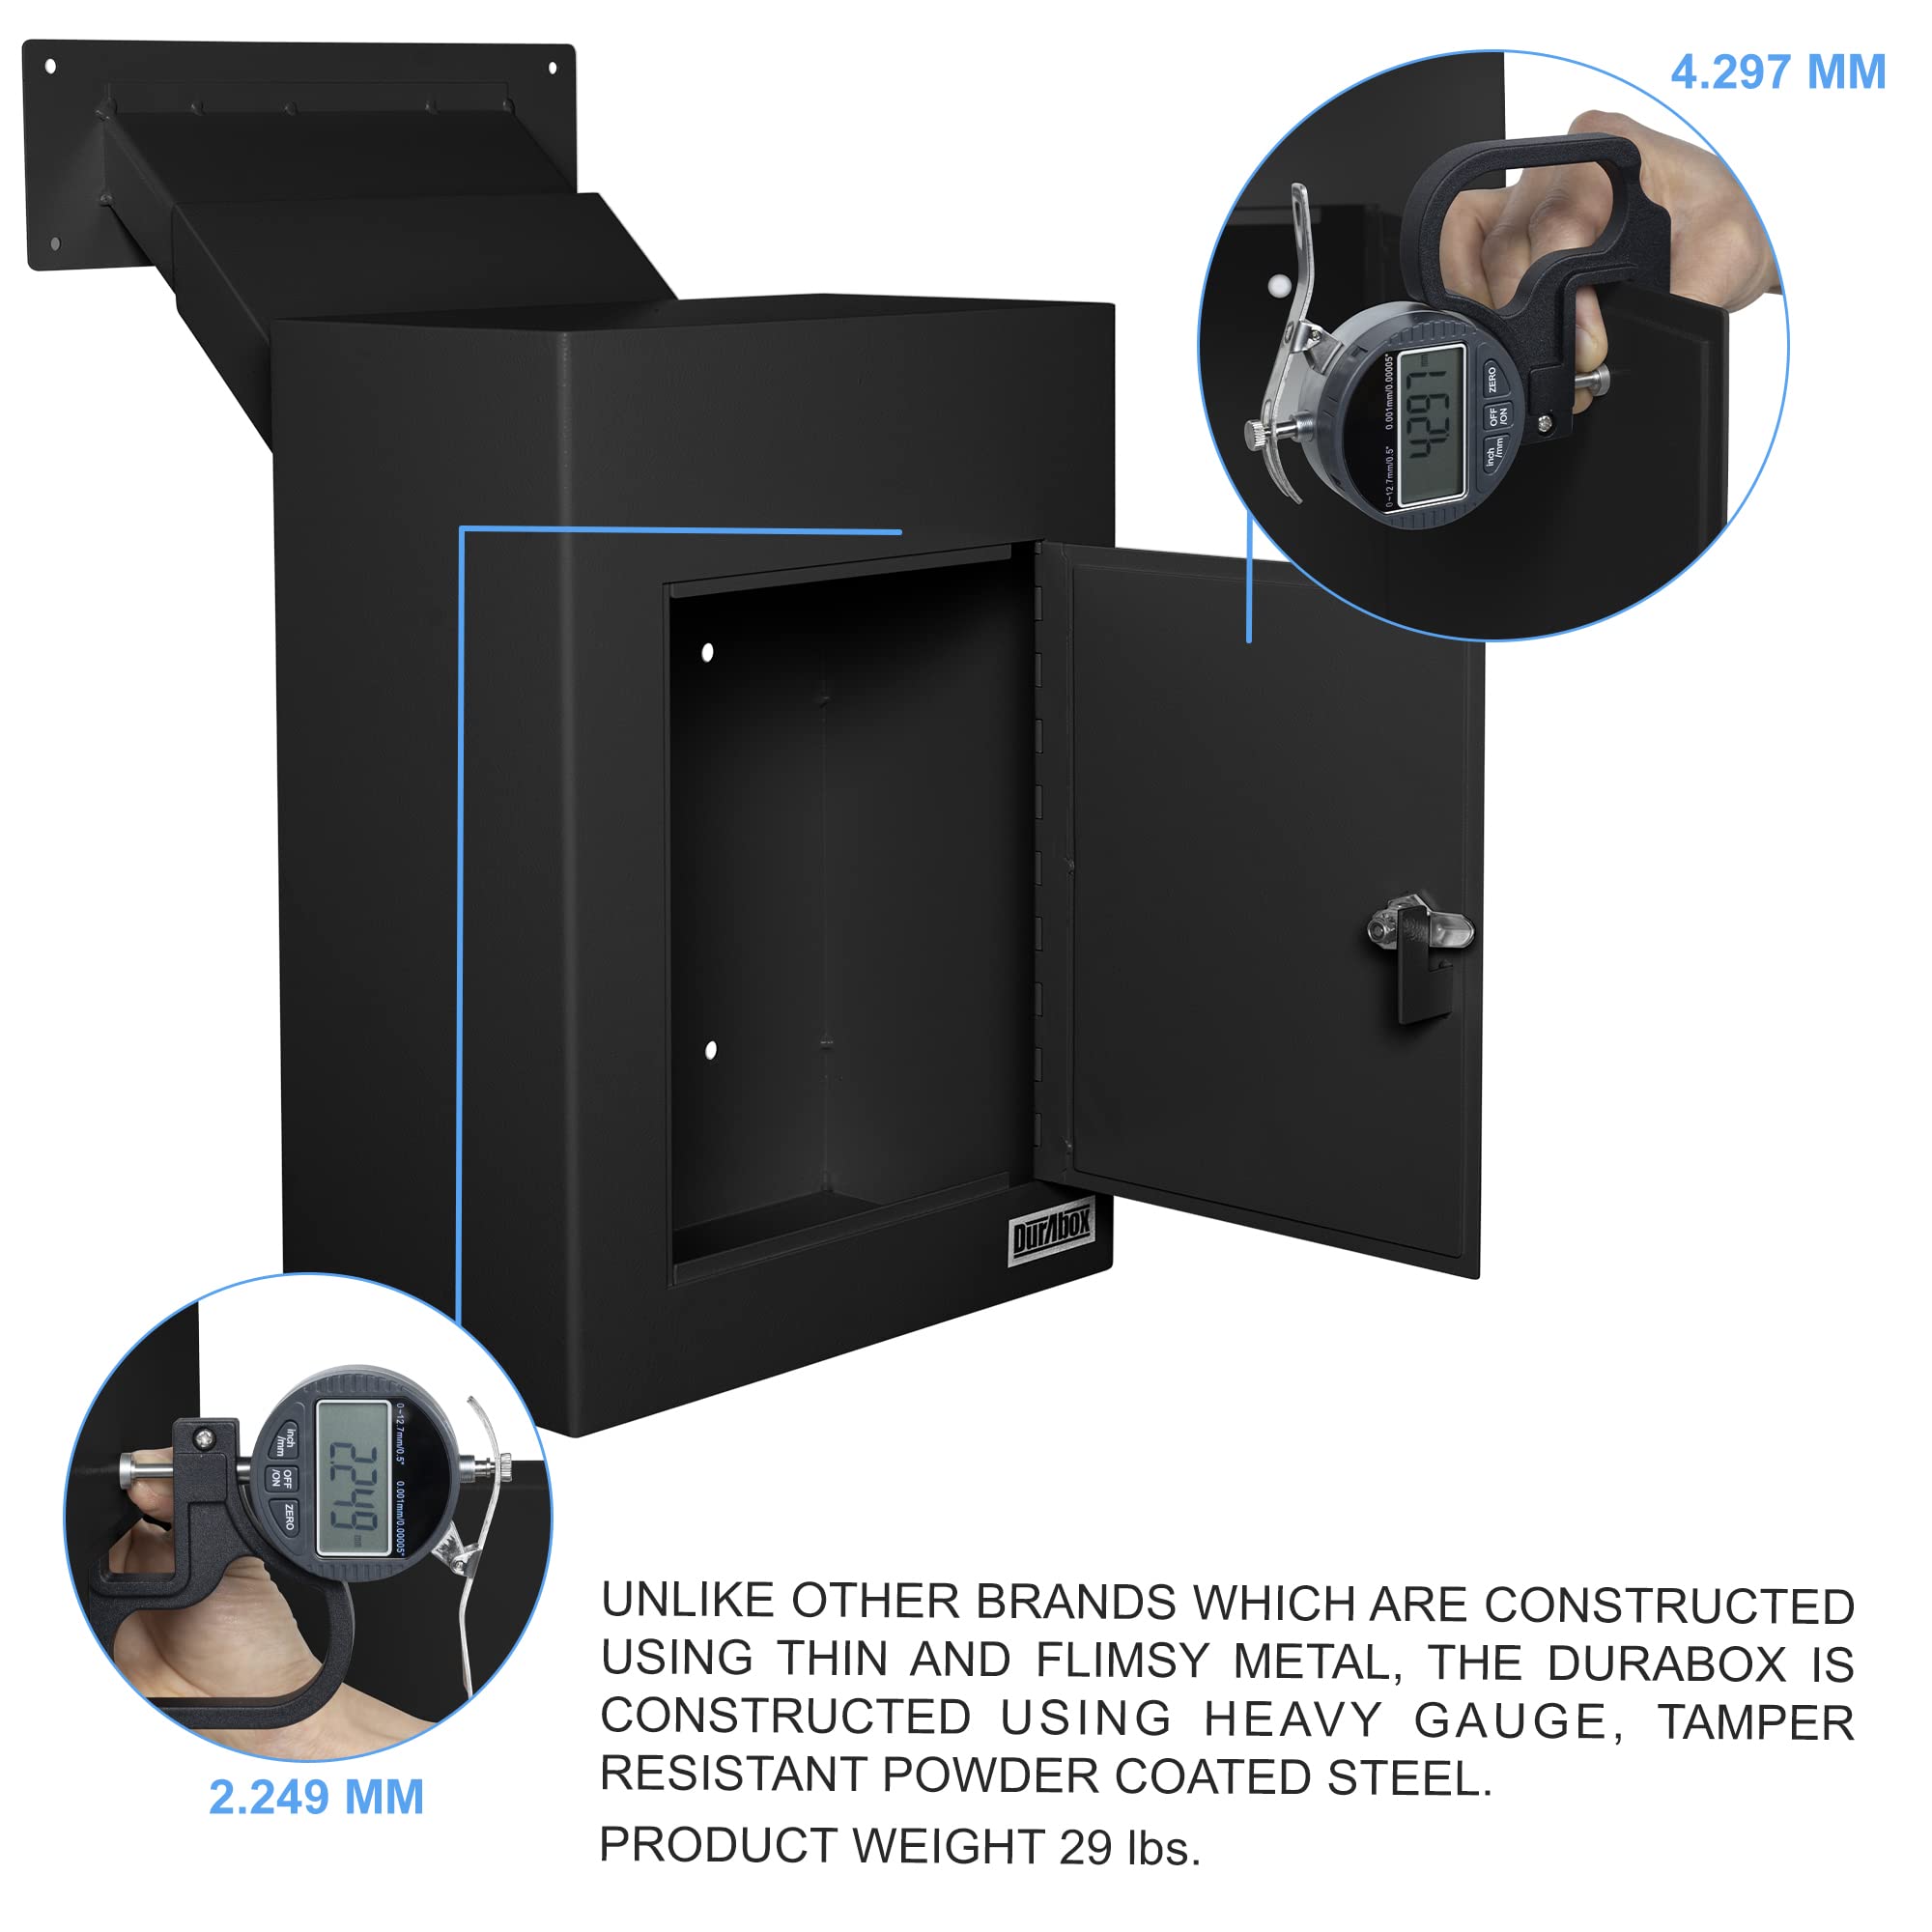 Durabox D700 Through the Wall Drop Box, Tubular Key Locking Secure Mailbox with Adjustable Chute Deposit, Pre-Drilled Mounting Holes - Safe Steel Mail Box (Black)